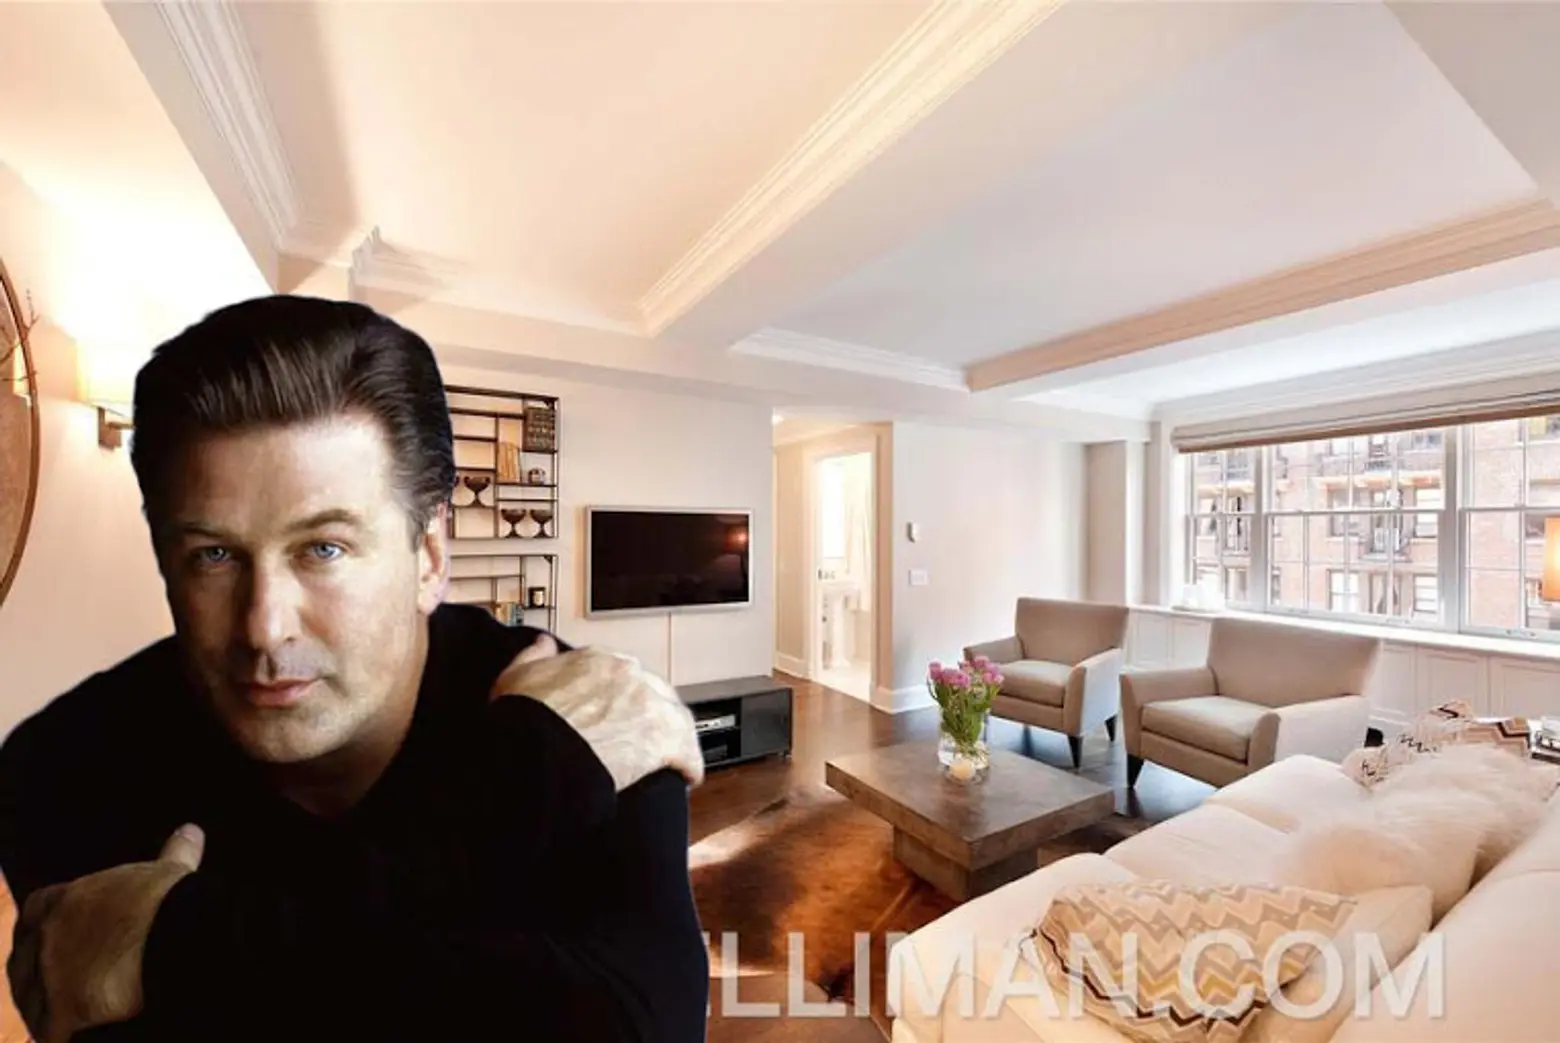 Alec Baldwin Sells One of His Devonshire House Apartments for $2.1M